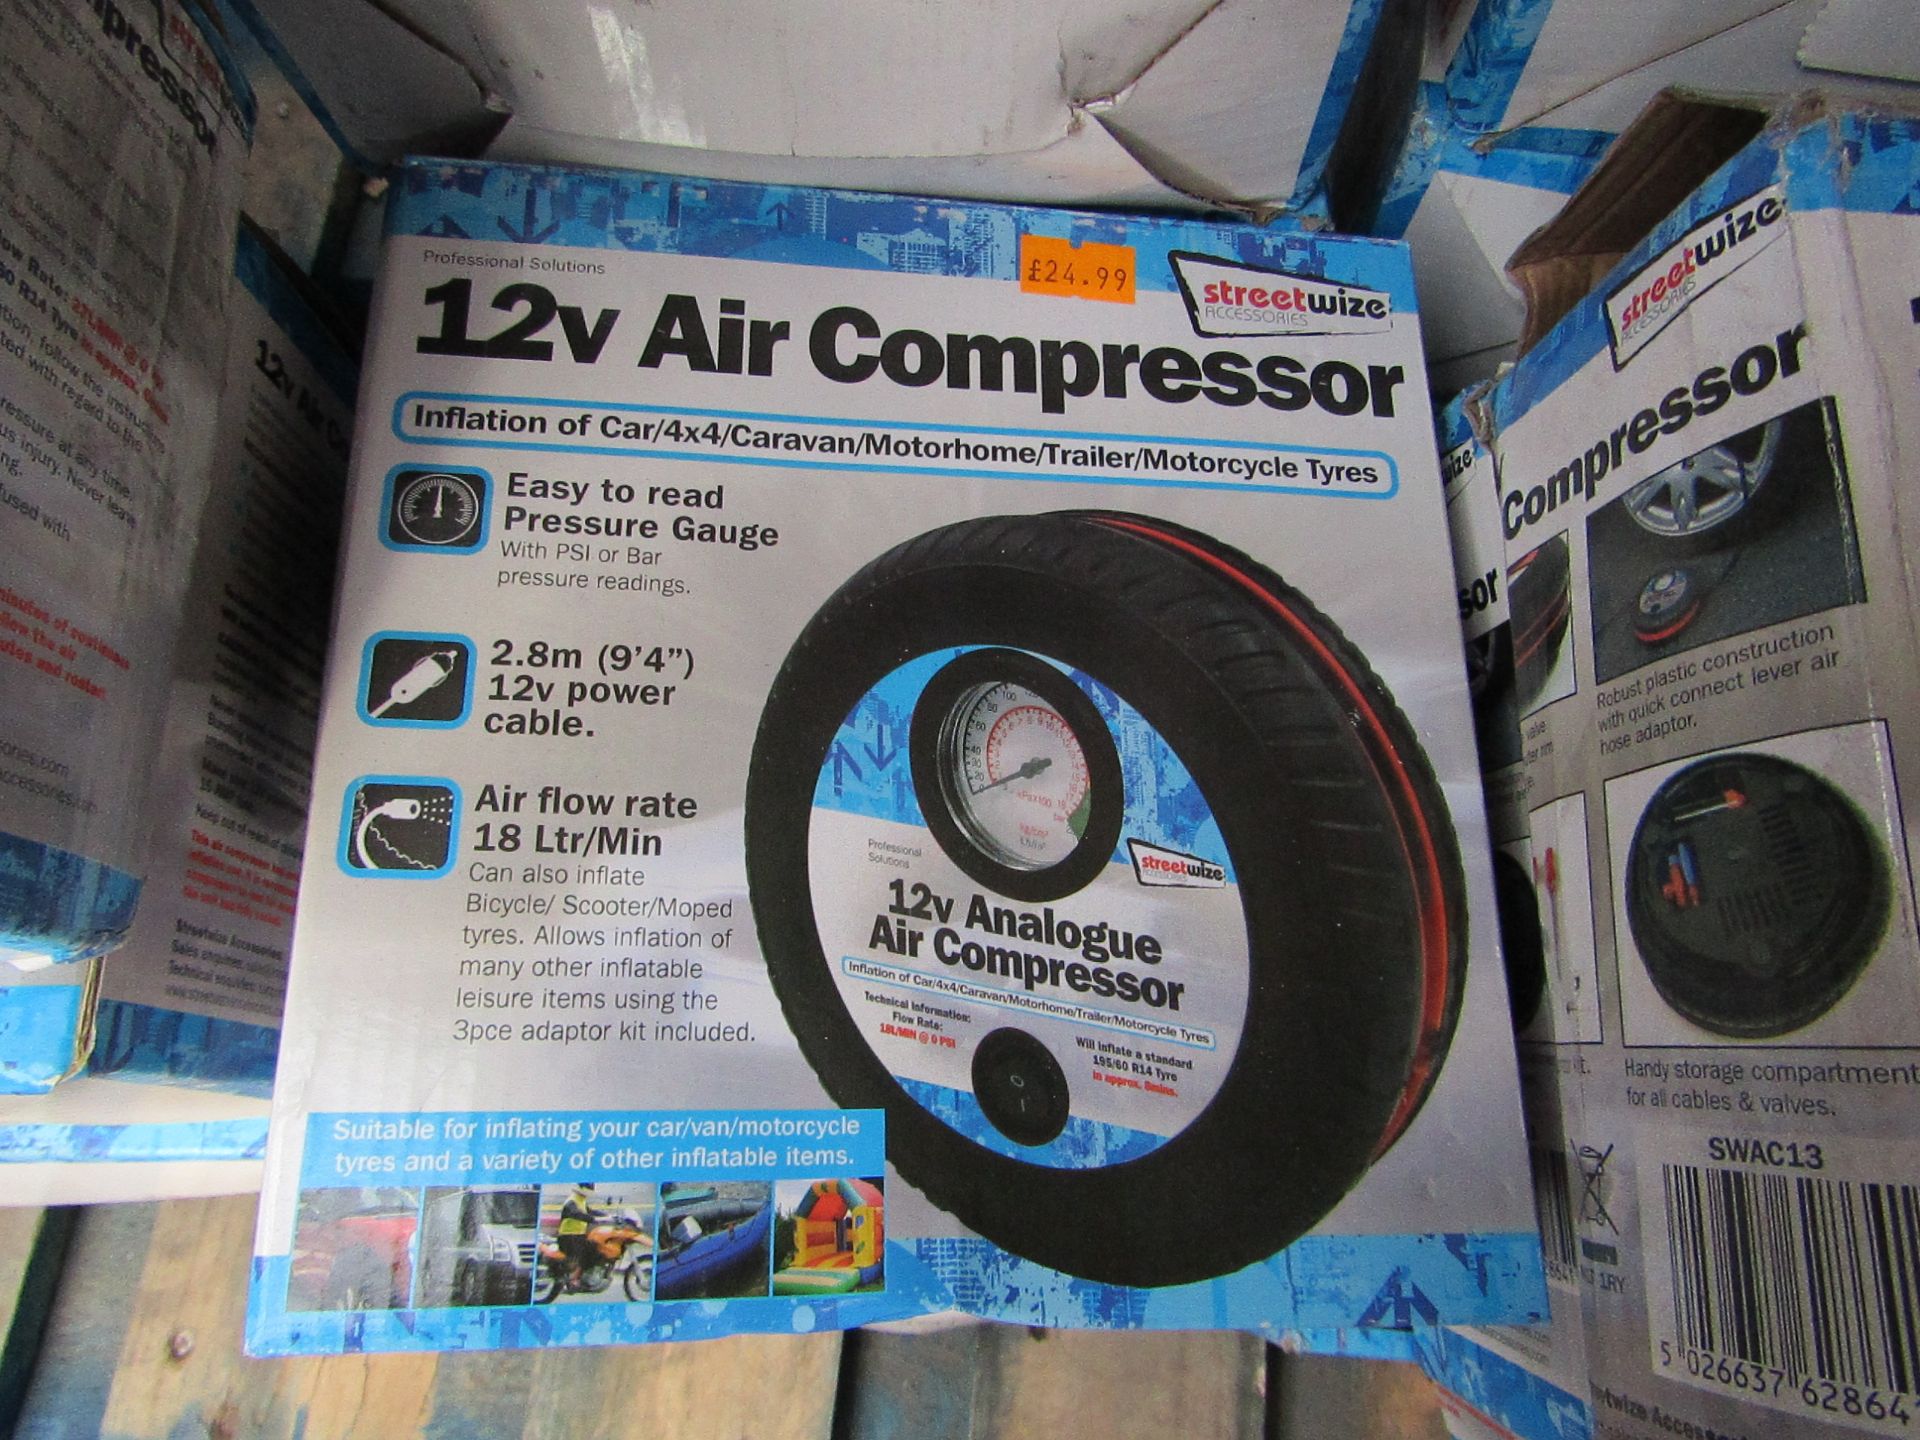 5x Streetwise 12V Air compressors, boxed and ucnehecked